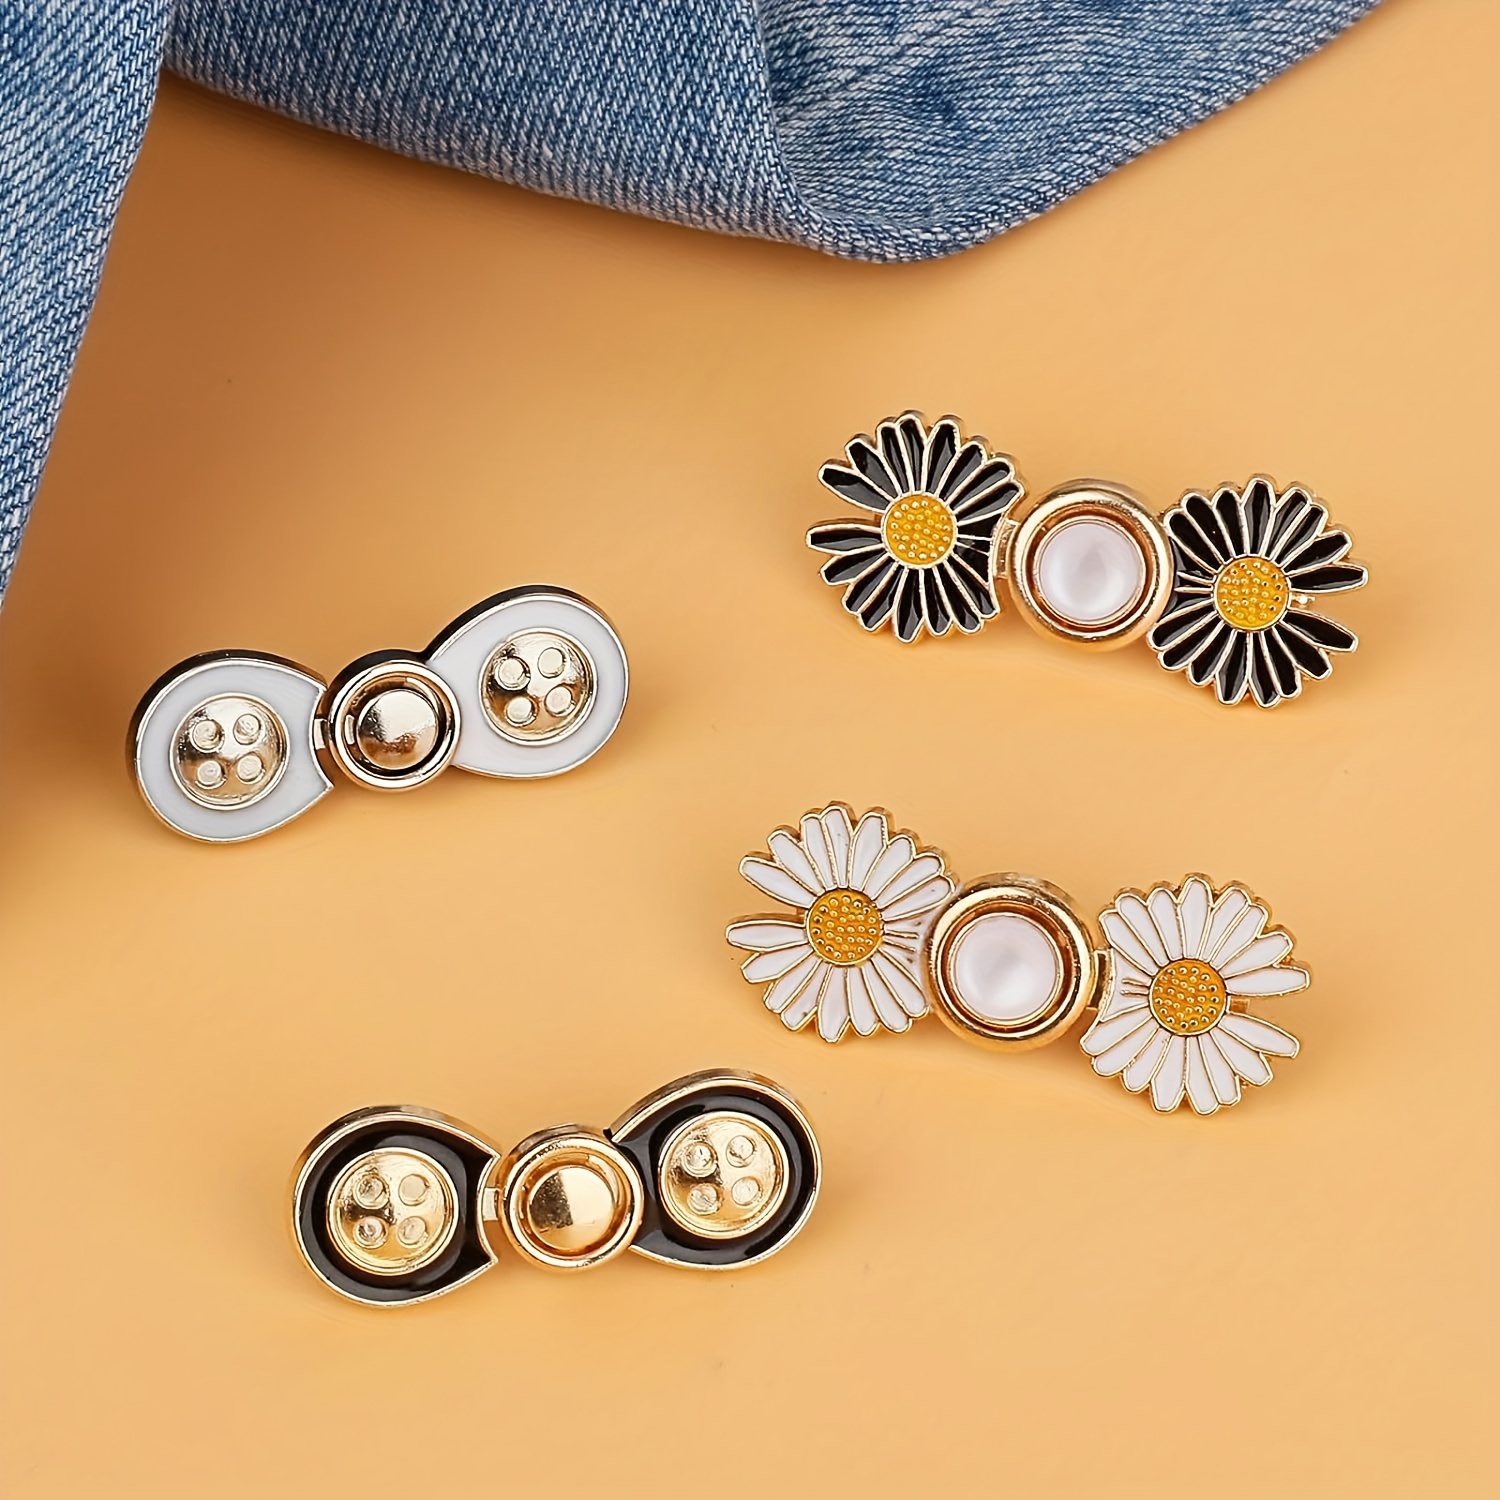 LRITER Buttons Pins for Jeans, Detachable Jean Buttons Pins, Daisy Flower  Jean Buttons Buckle for Loose Jeans, Jeans Button Tightener to Adjust The